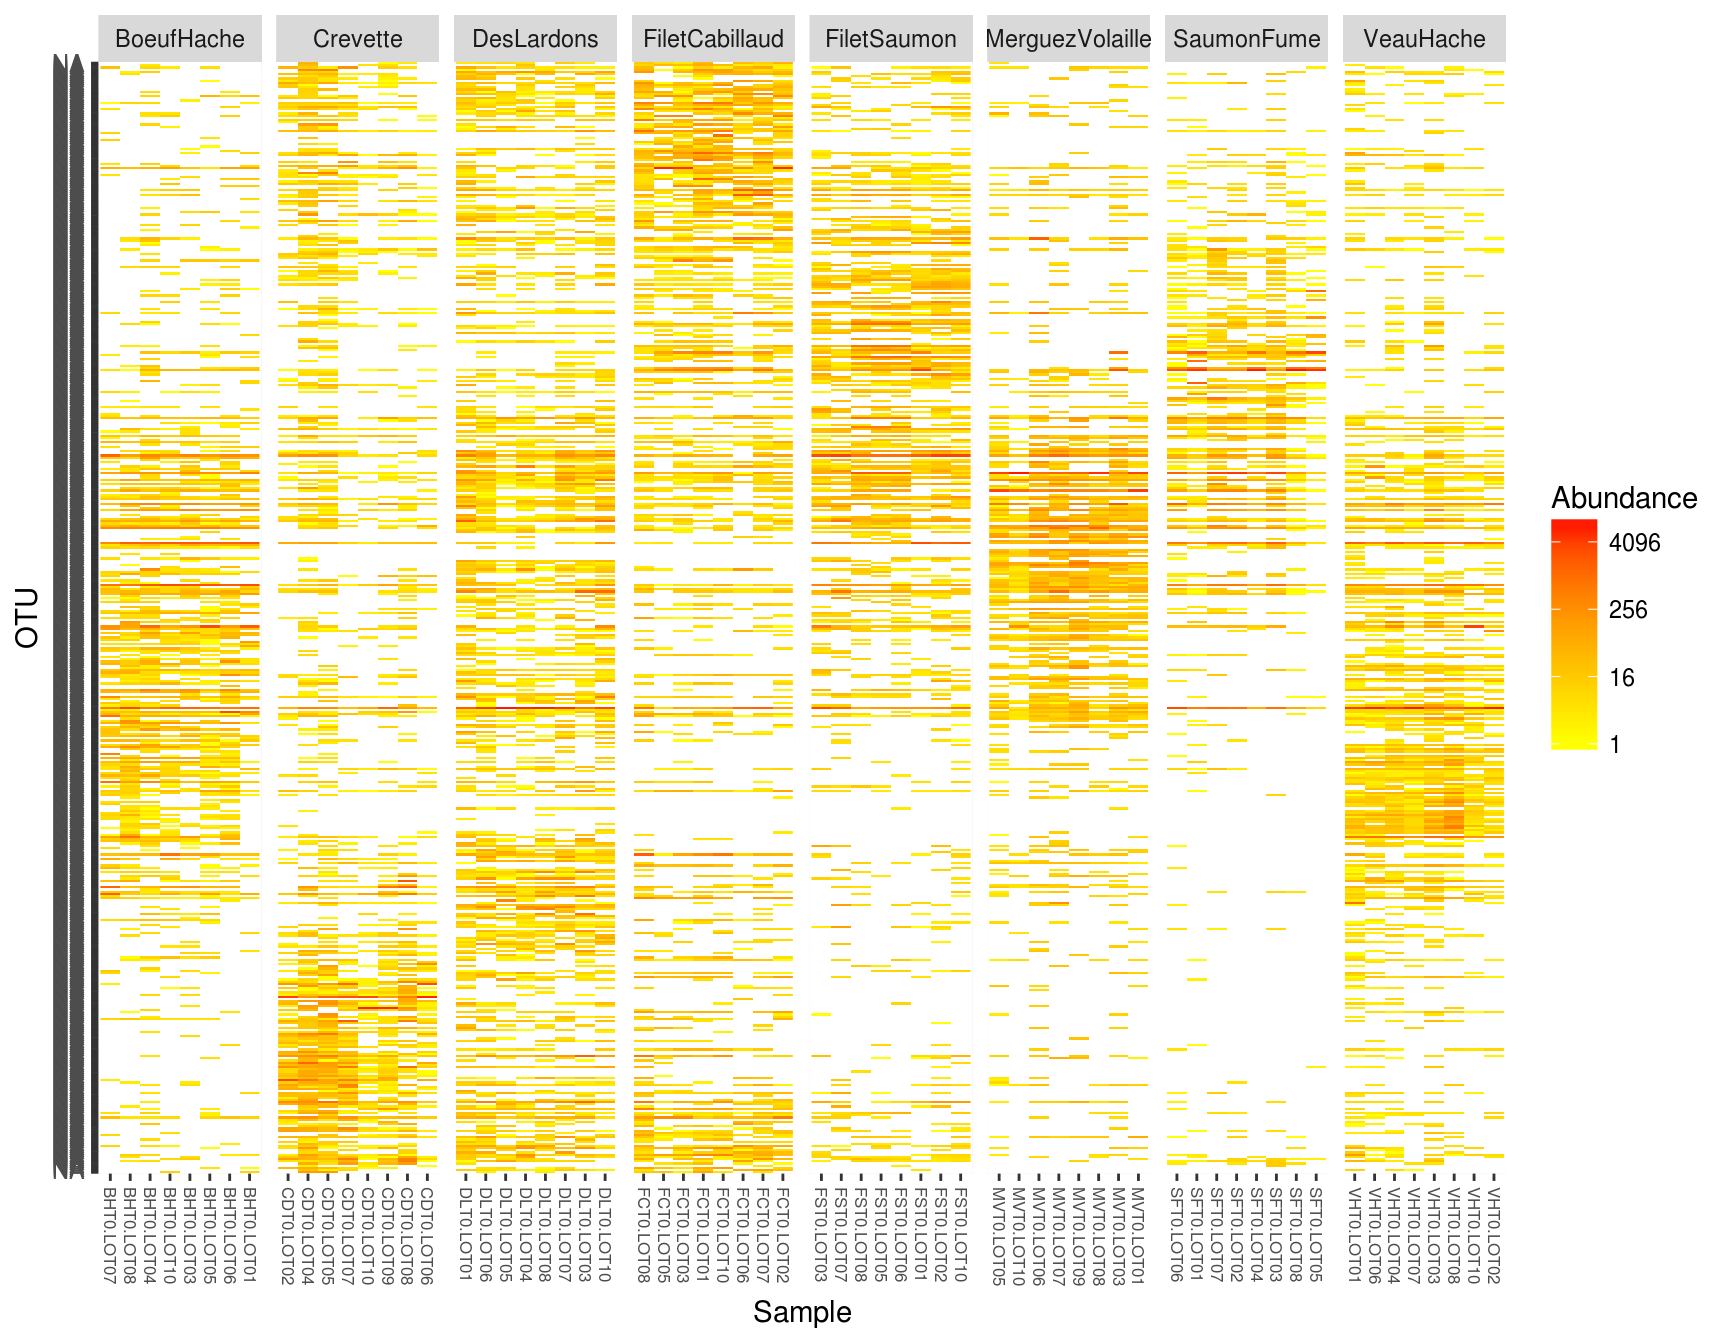 /repository/static/images/525e78406276b403/static%2Fimages%2Fphyloseq_plot_heatmap_red.png